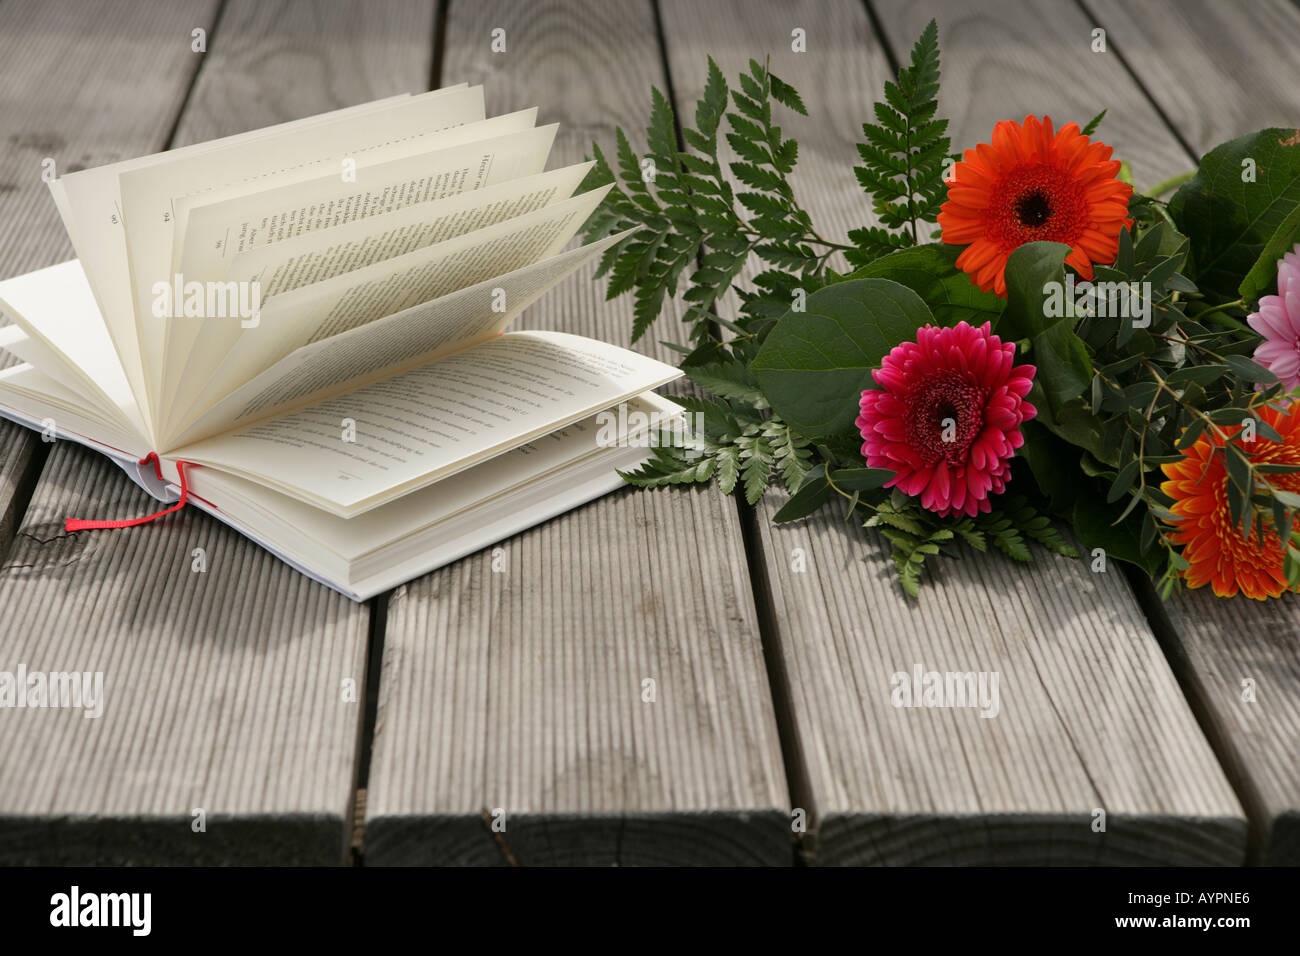 Bunch of flowers and a novel seen on a wooden table Stock Photo